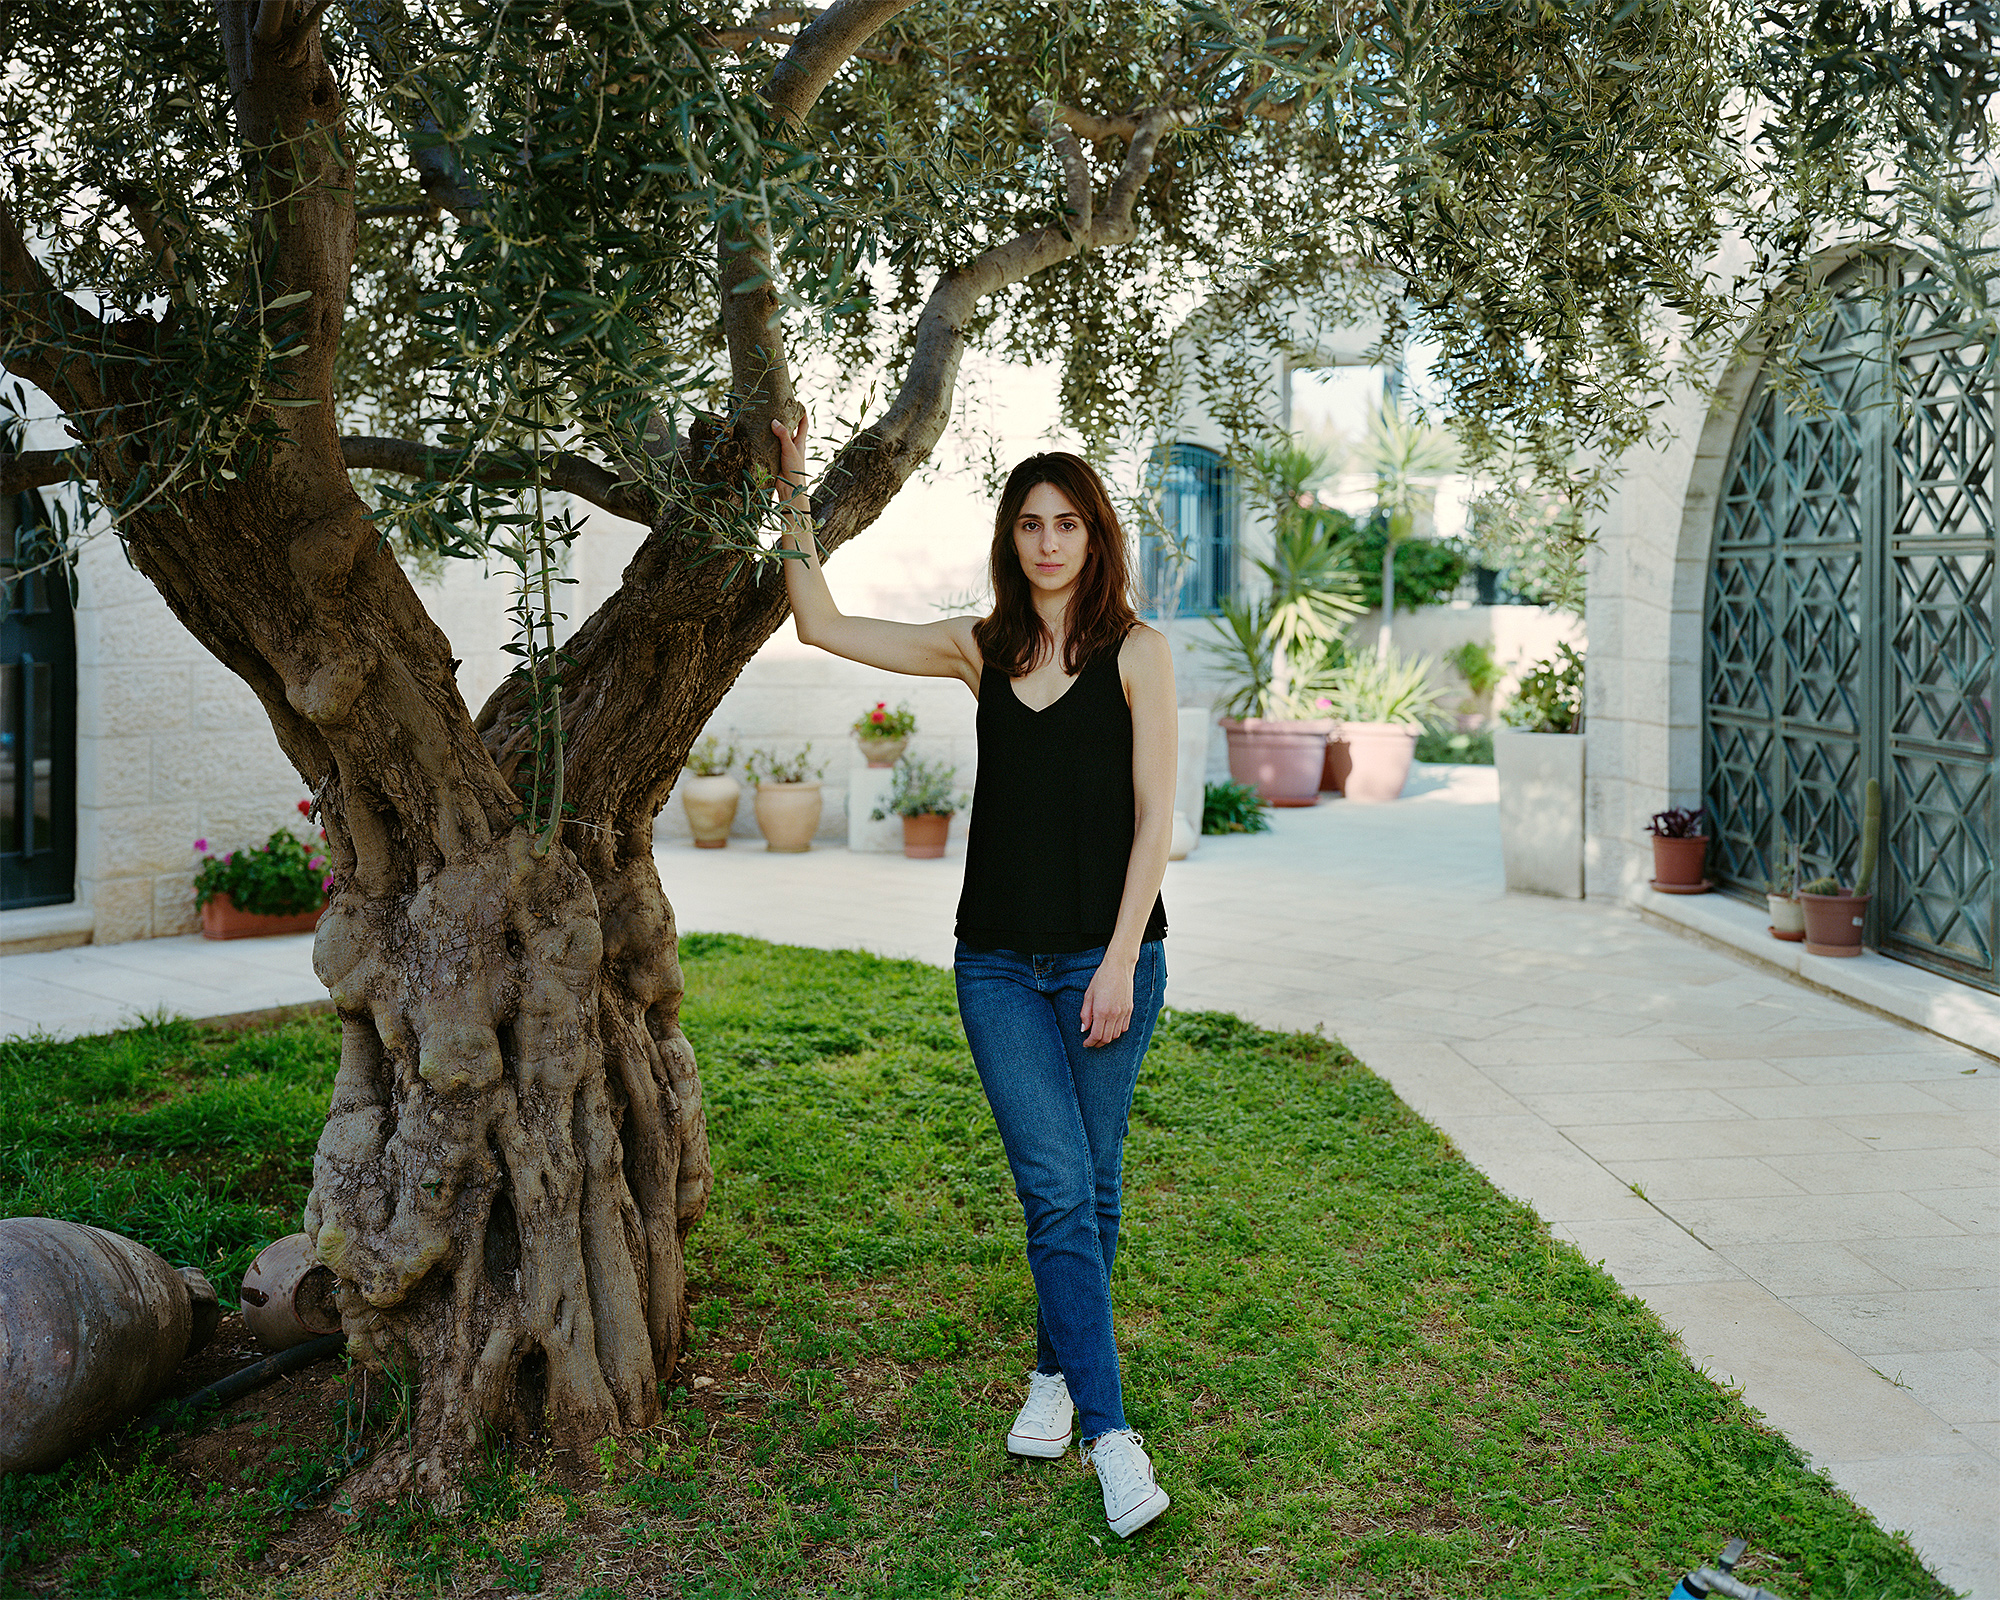 Young woman stands next to an ancient olive tree in a courtyard